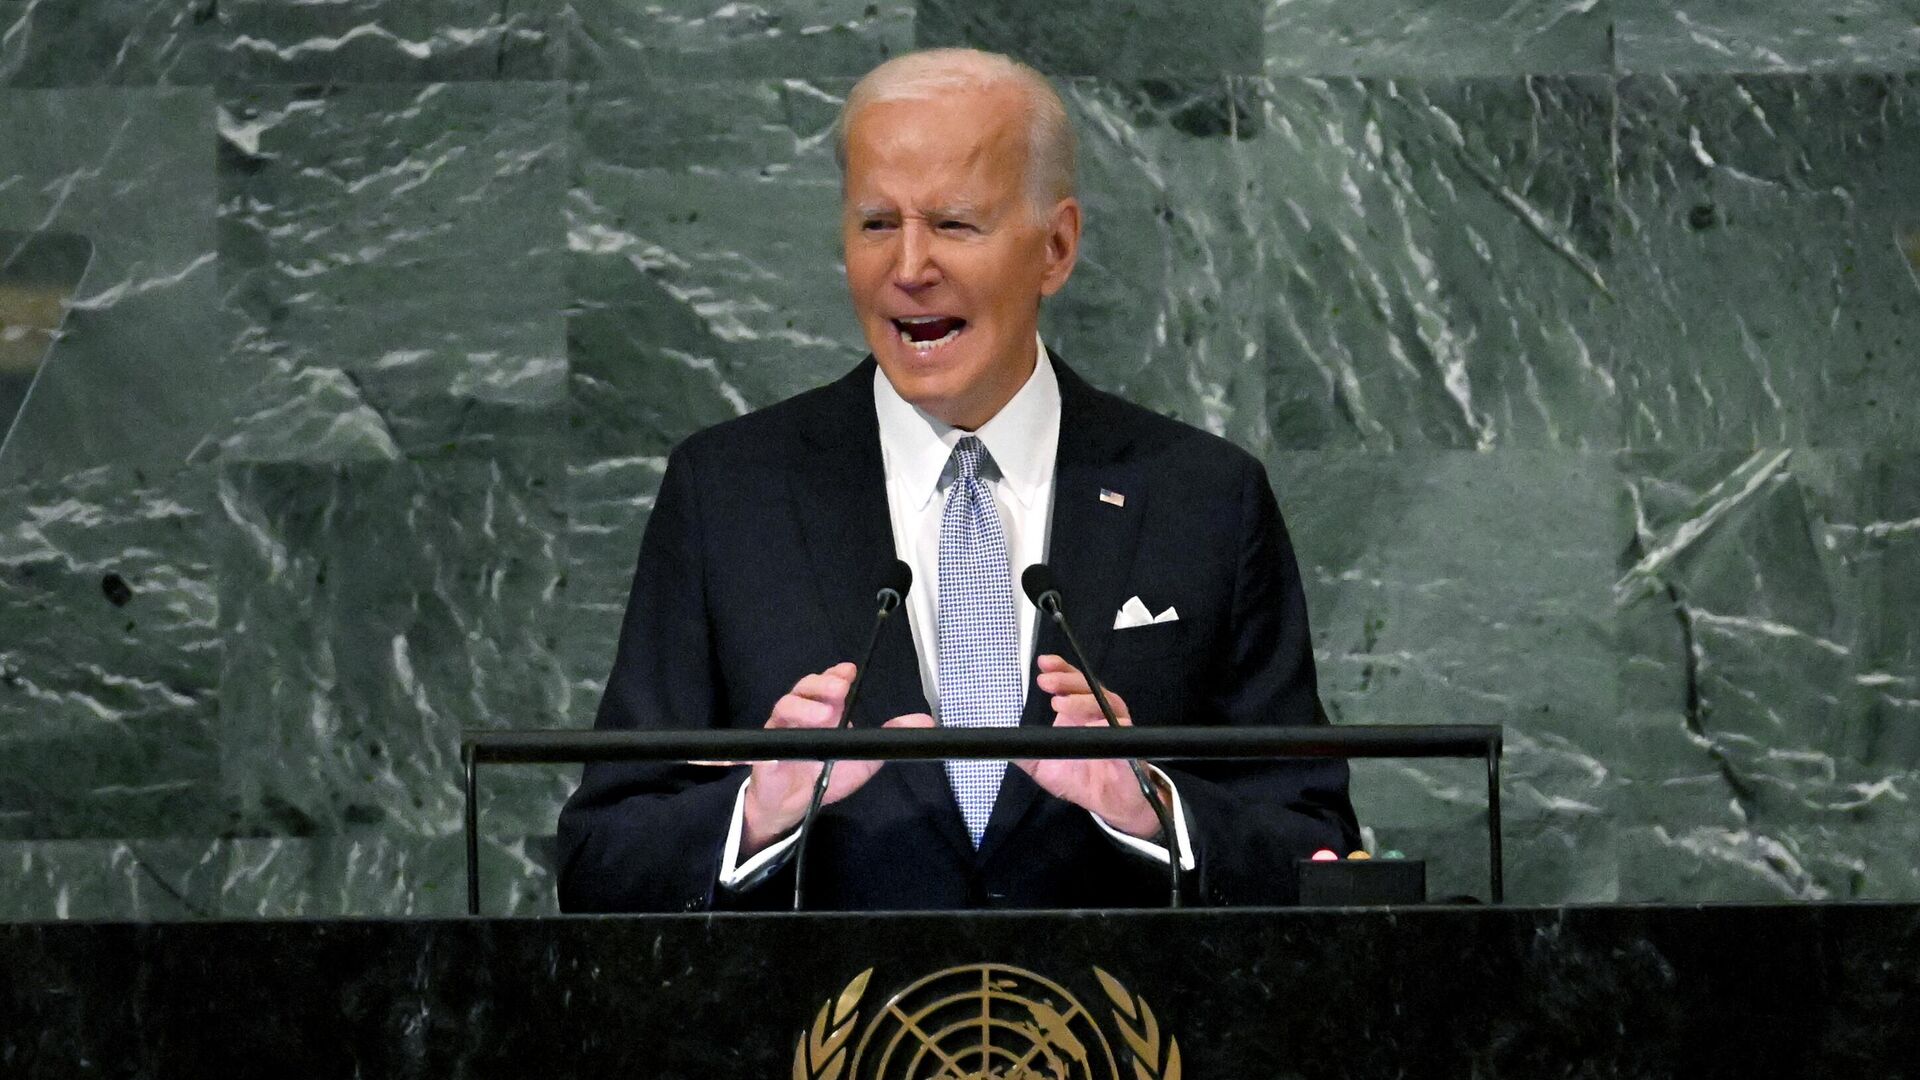 US President Joe Biden addresses the 77th session of the United Nations General Assembly at the UN headquarters in New York City on September 21, 2022. - Sputnik International, 1920, 21.09.2022